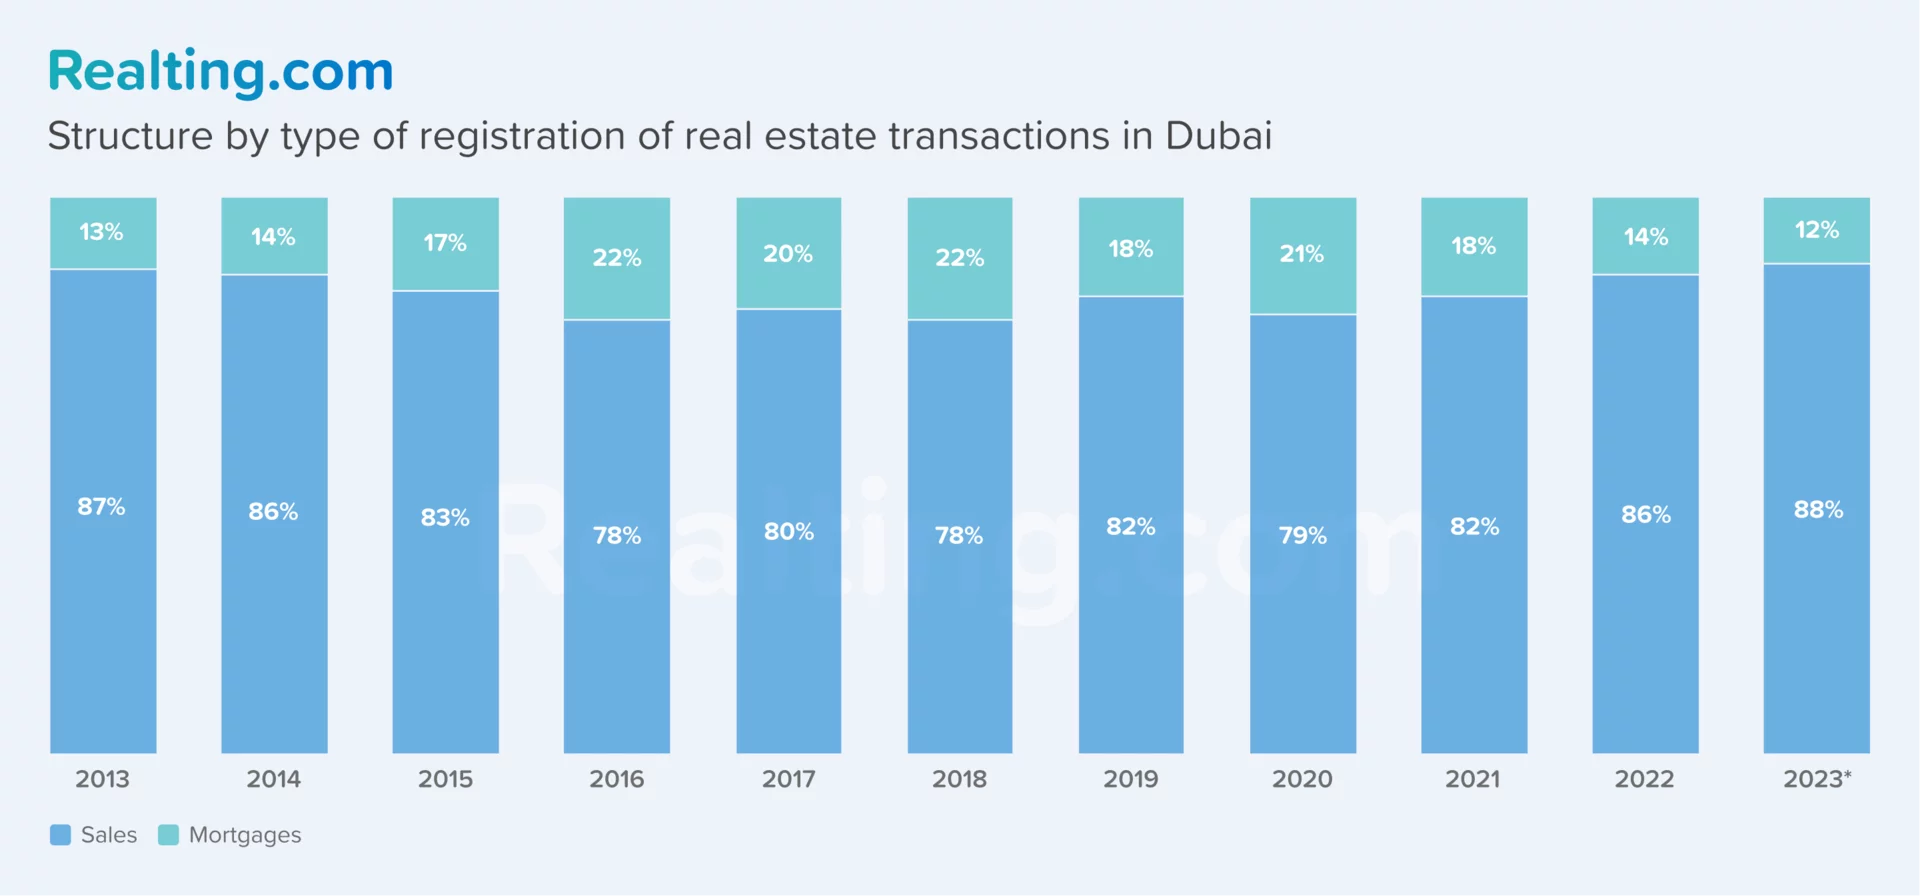 Structure by type of registration of real estate transactions in Dubai